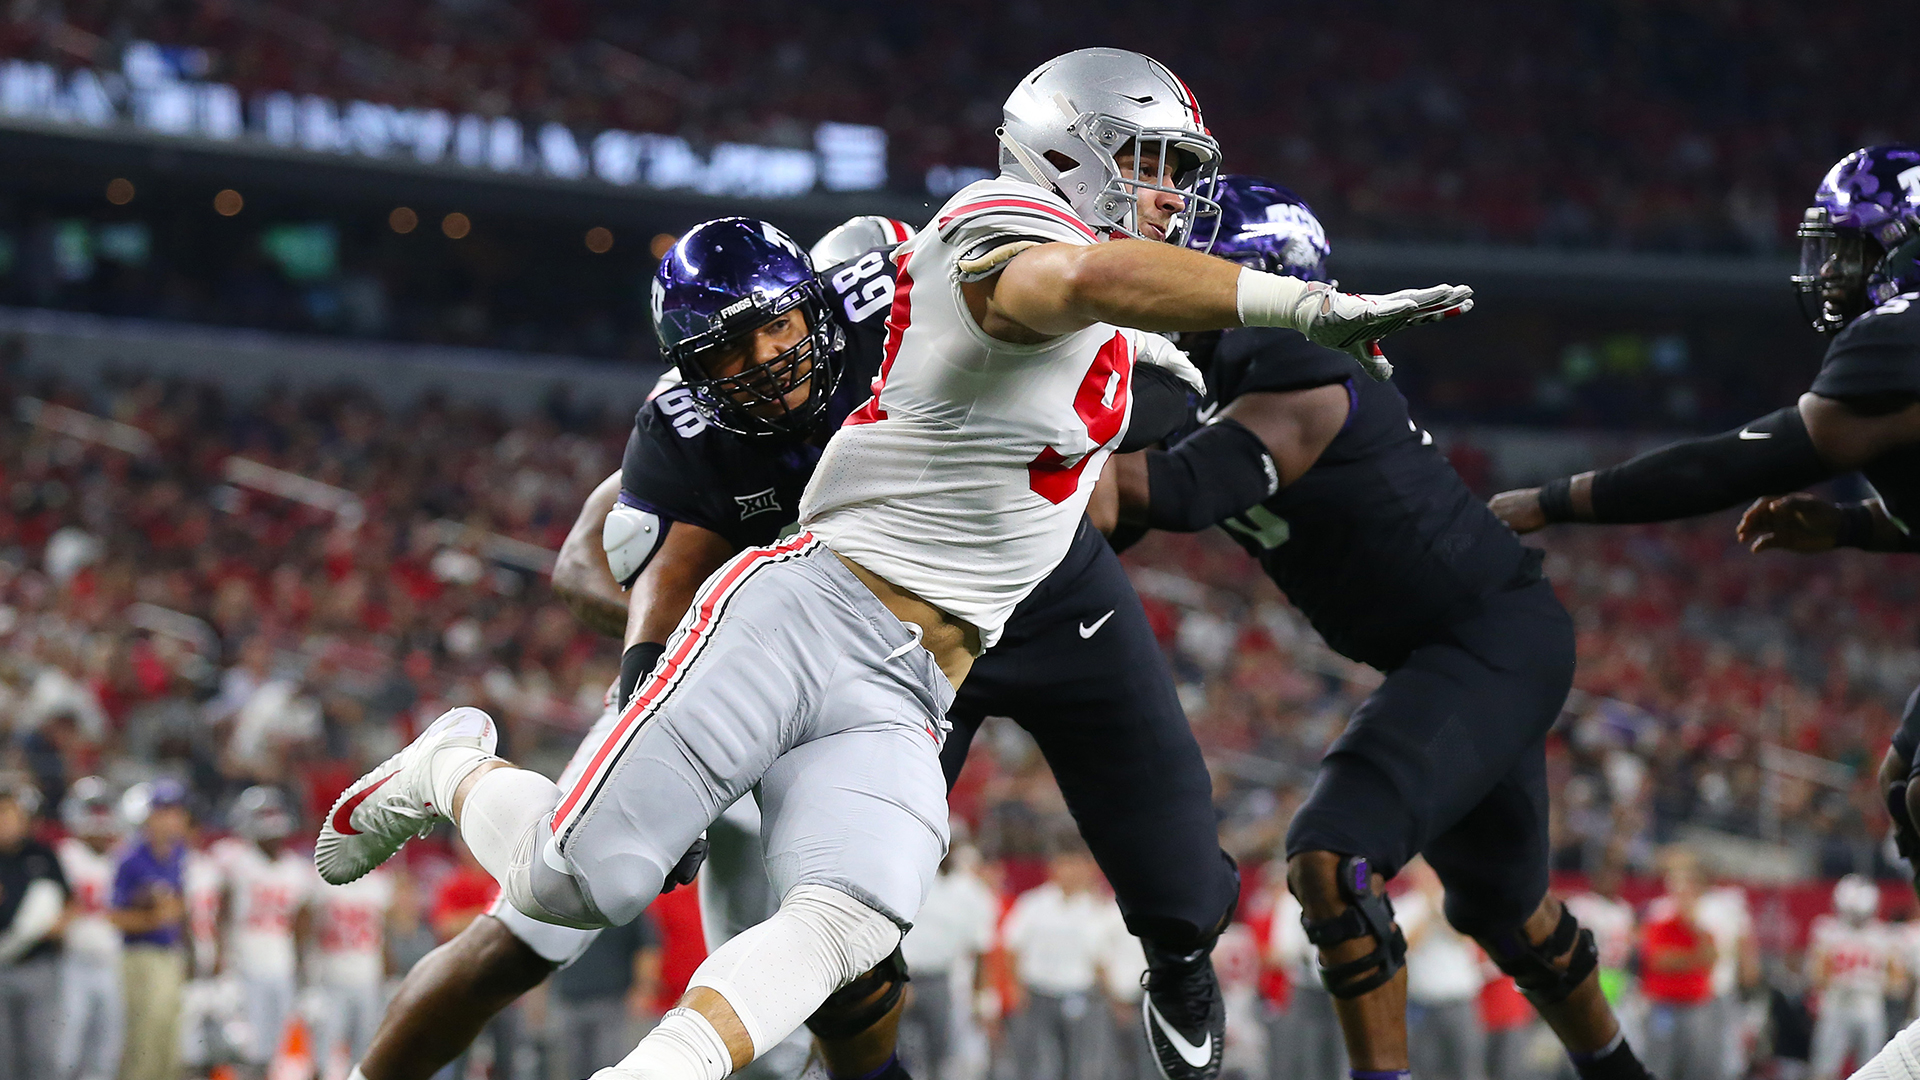 Ohio State Captain Tells Cardinals He Would Take Nick Bosa With No